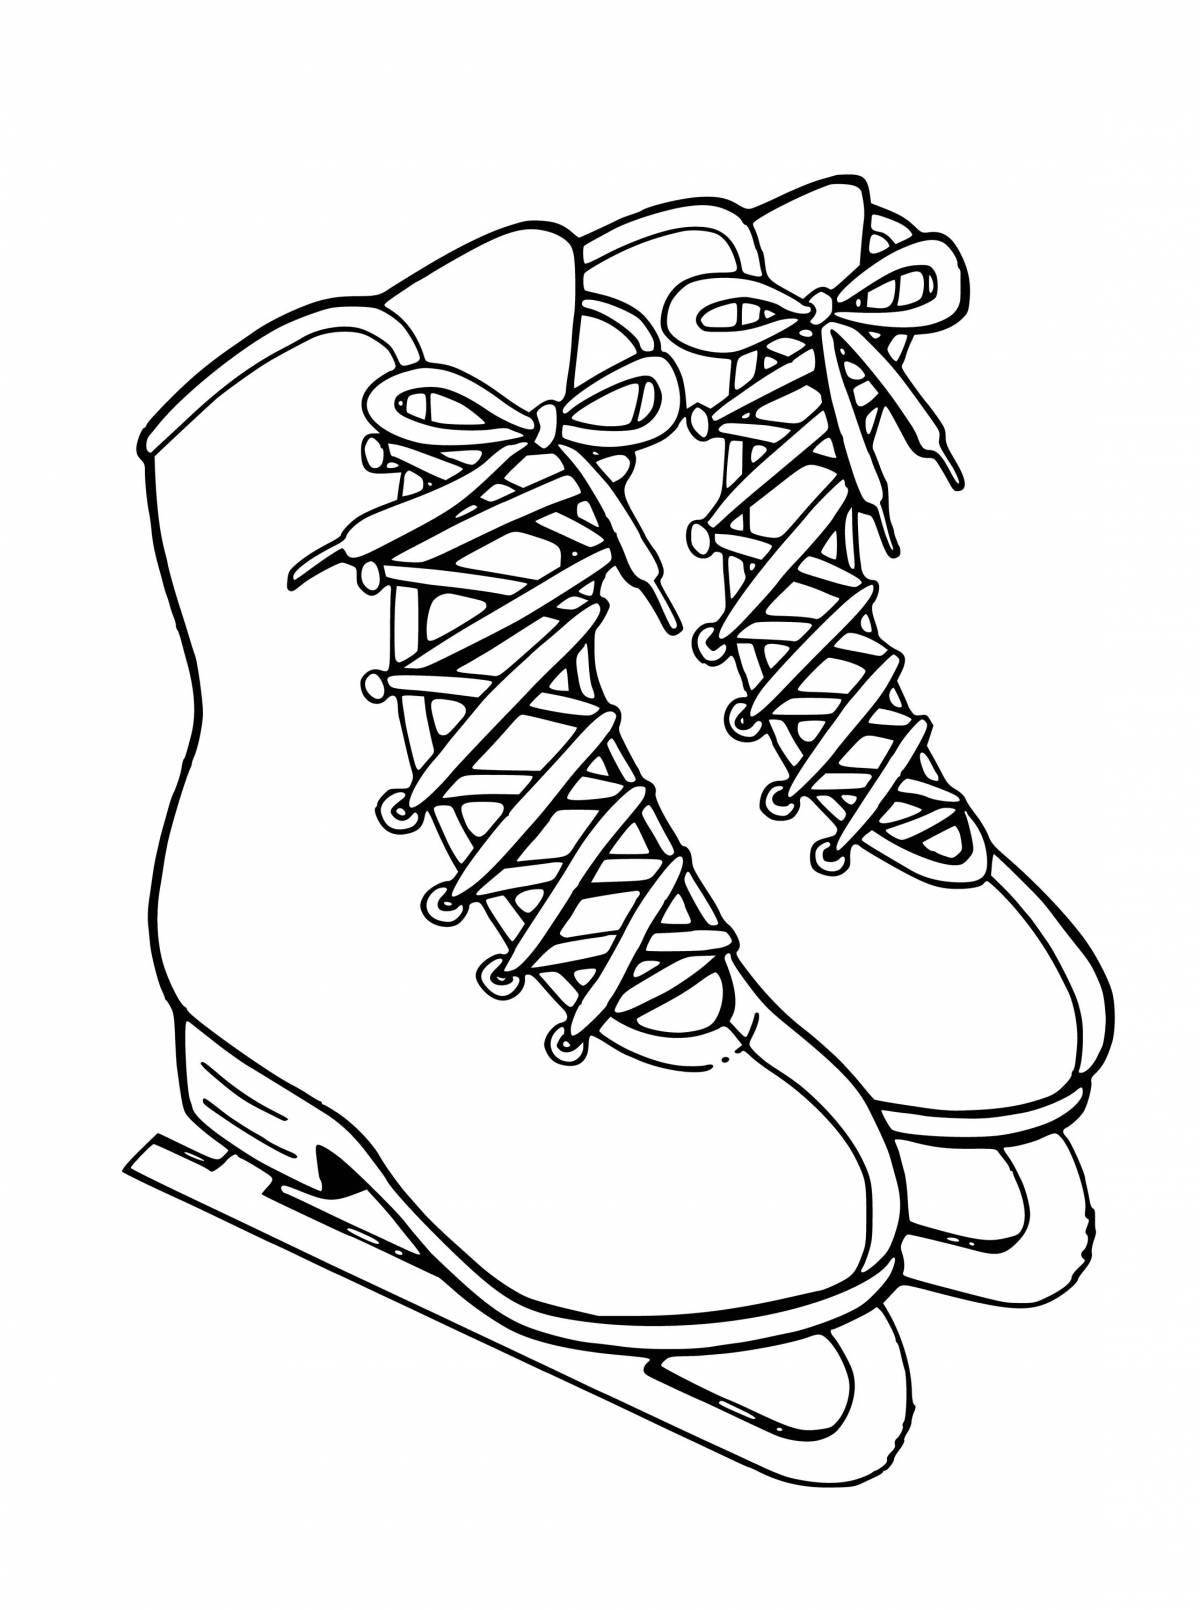 Colored skates coloring book for children 5-6 years old